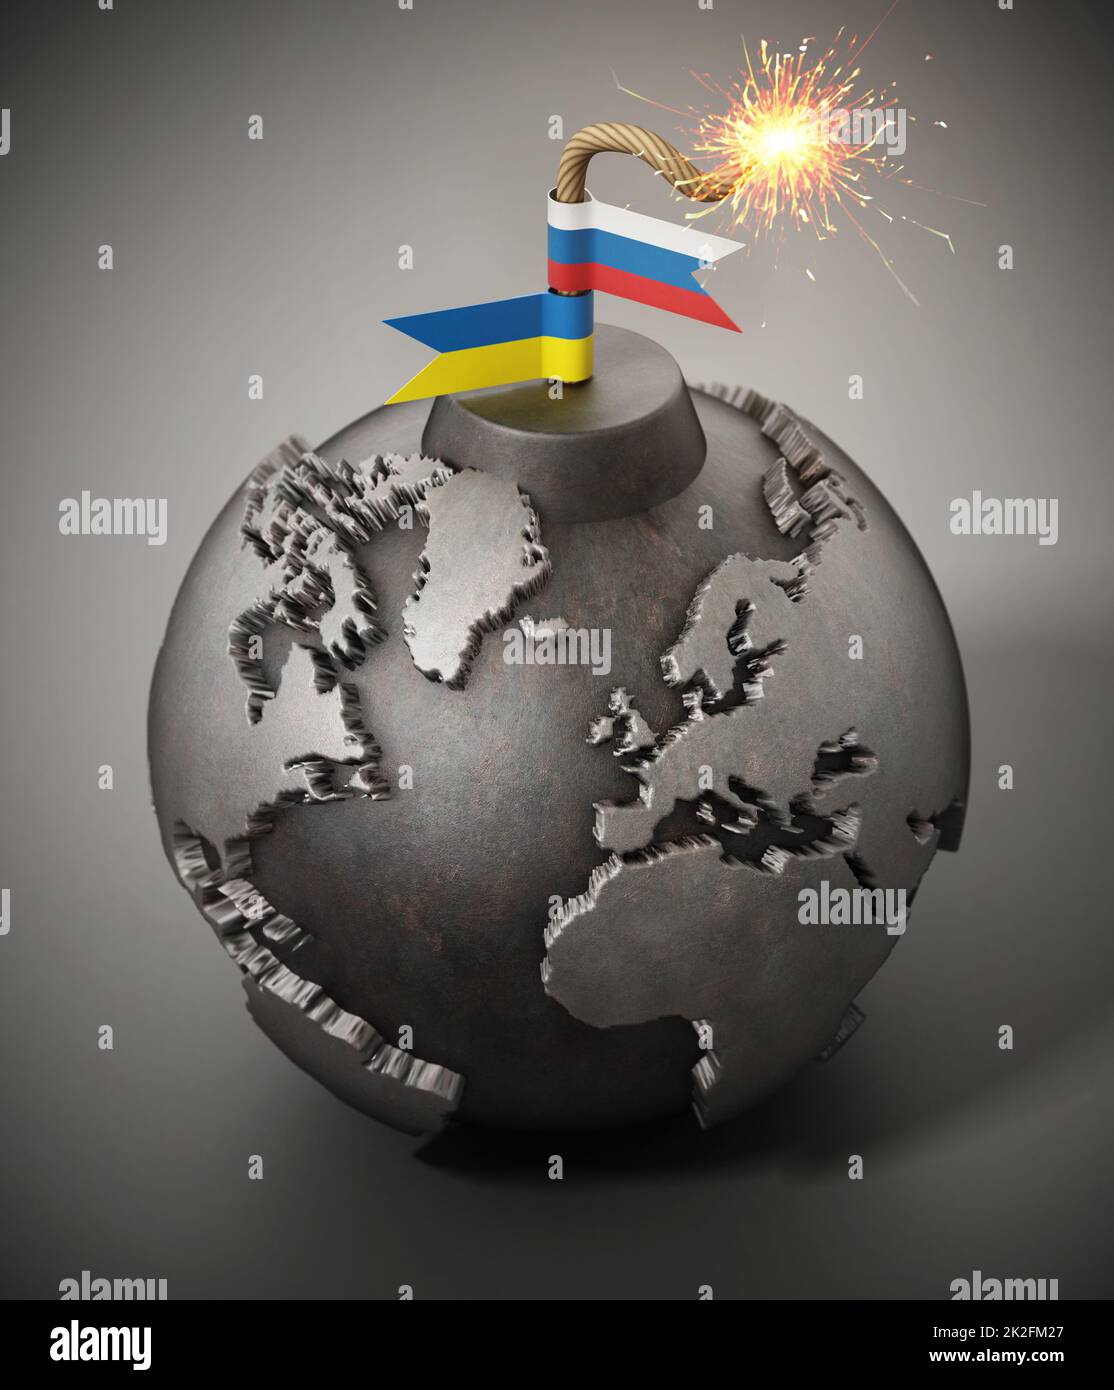 World map shaped bomb with Russia and Ukraine flags as fuse. 3D illustration Stock Photo